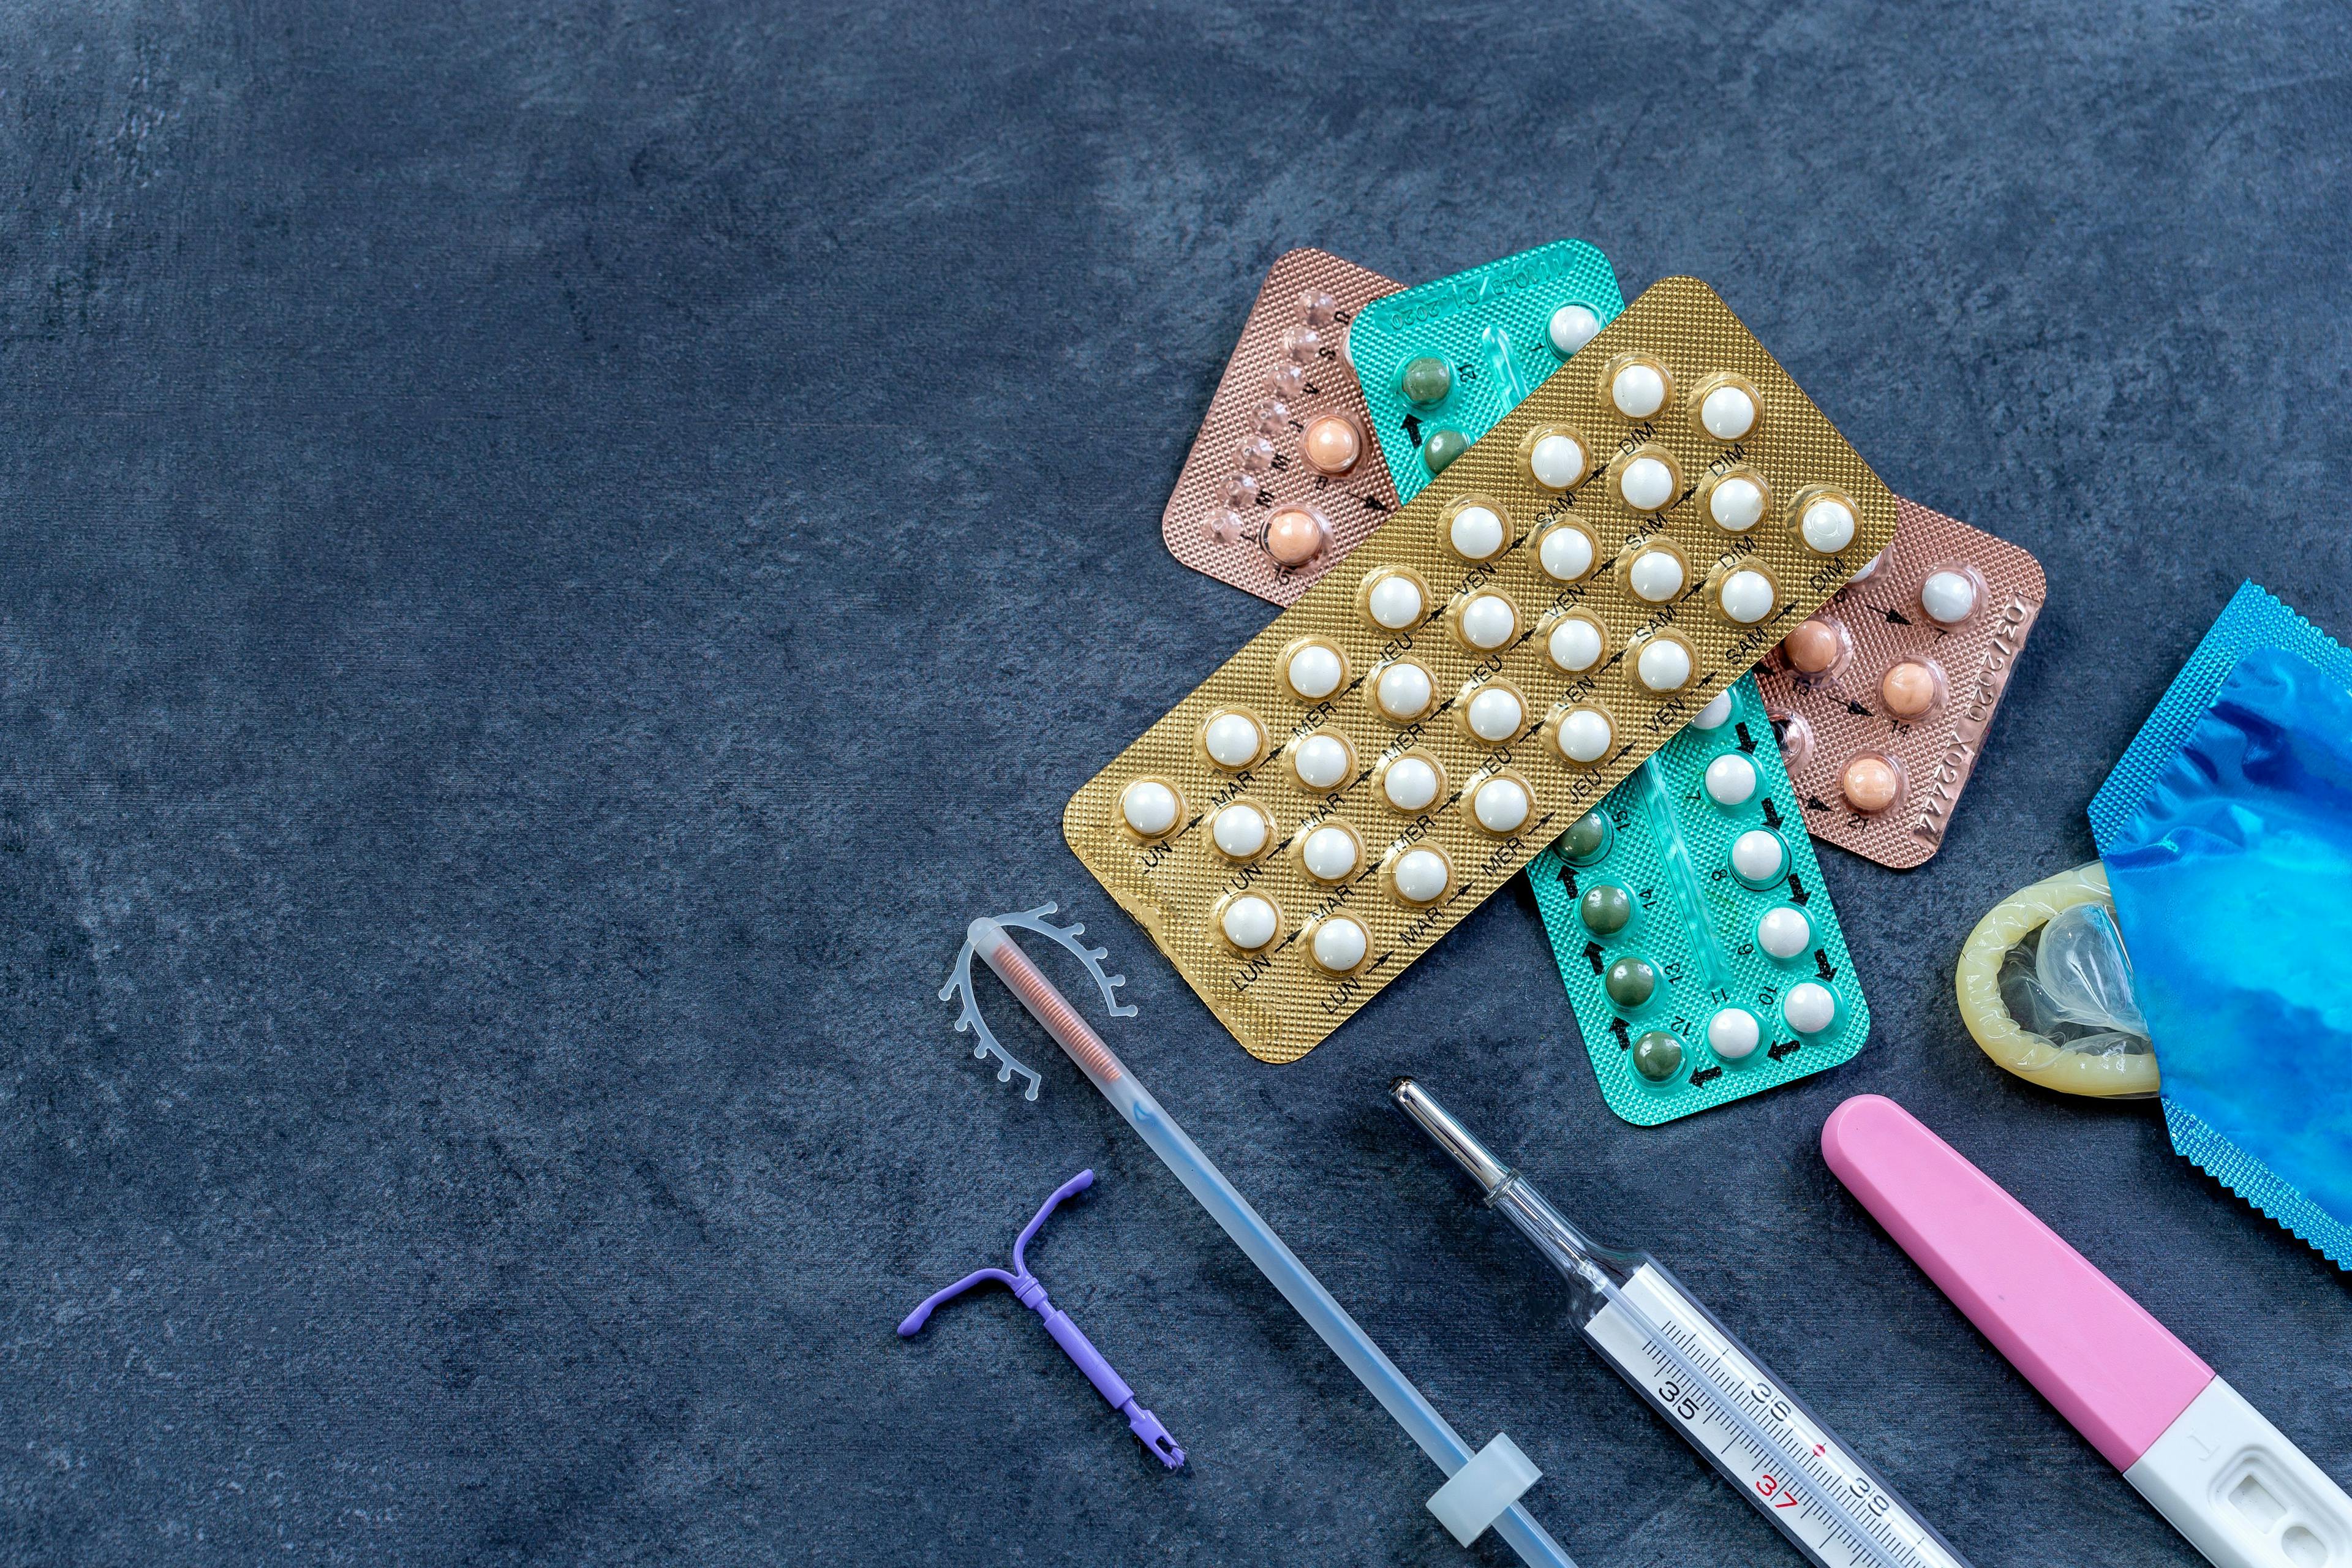 Making Contraception More Available